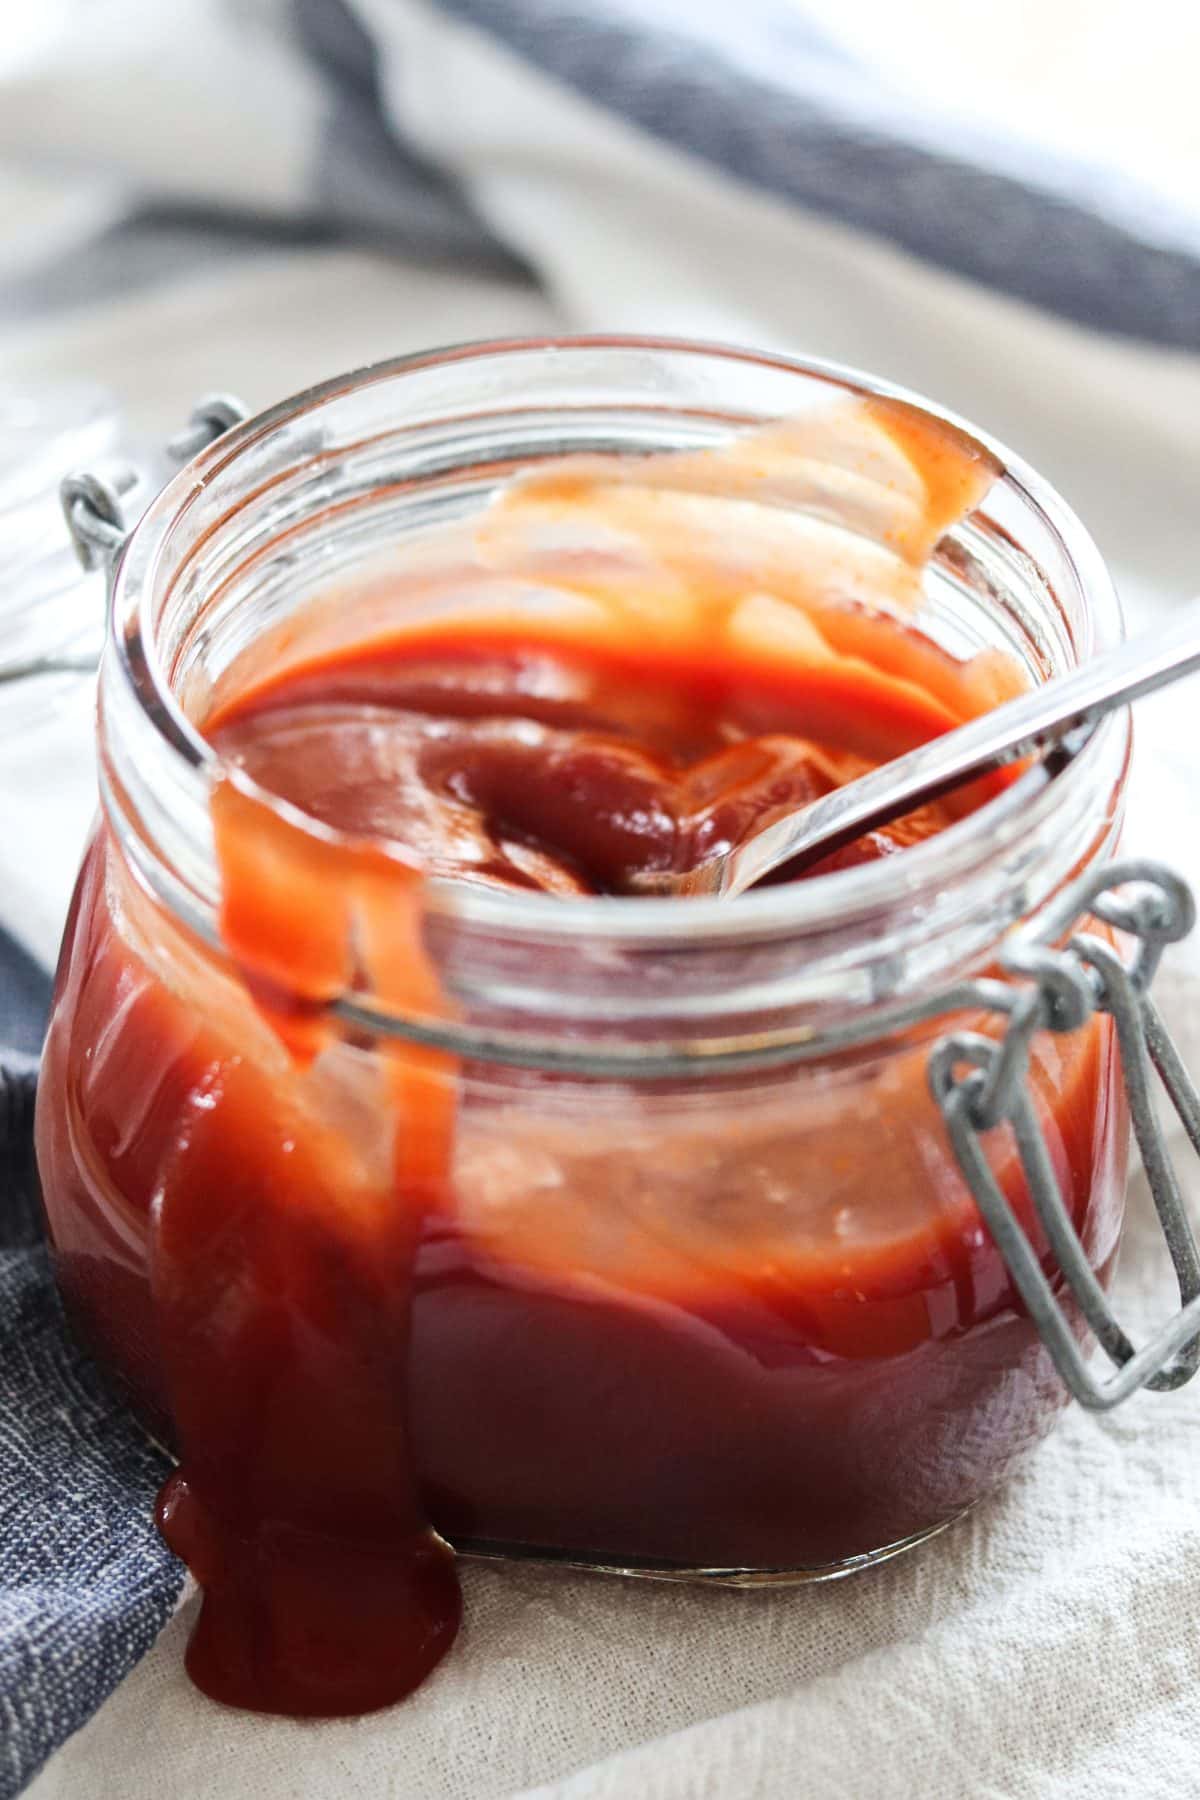 barbecue sauce in a jar with a spoon, with barbecue sauce spilled on the side